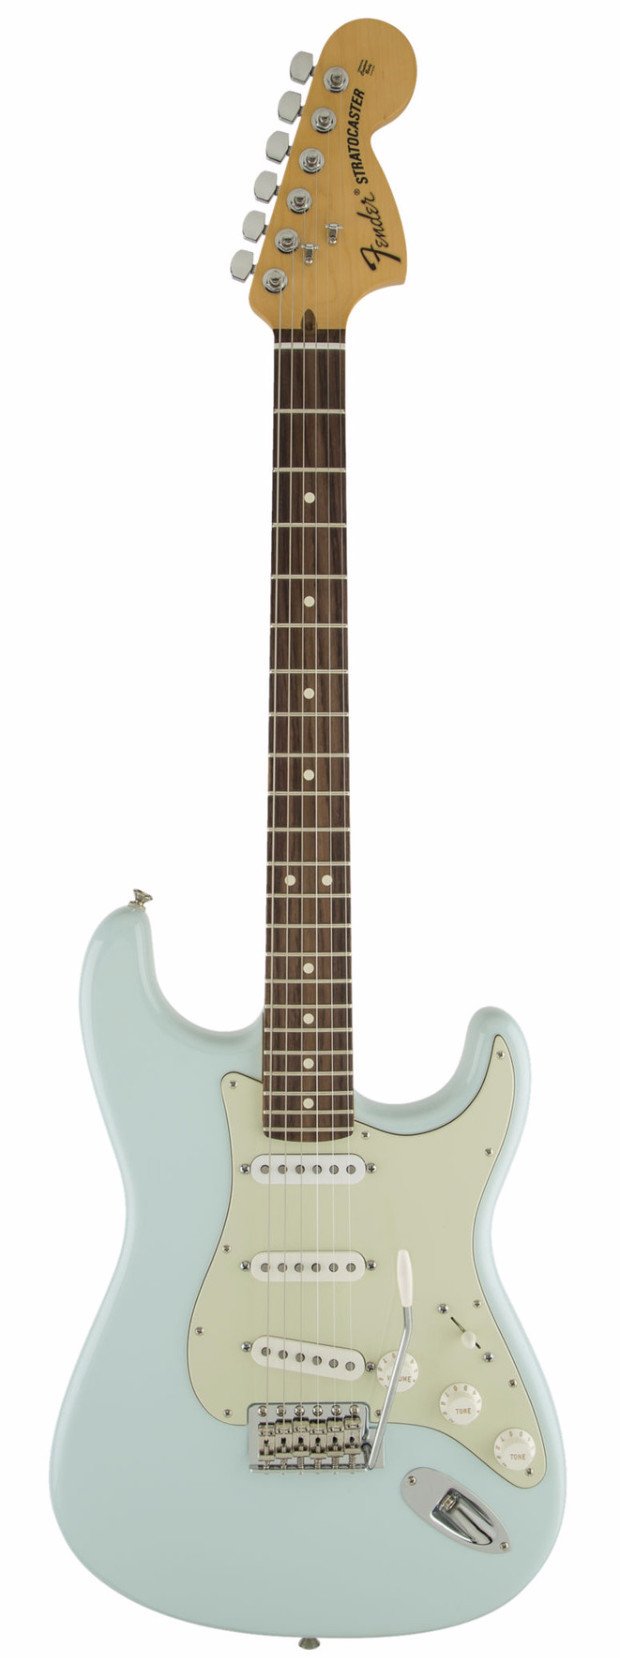 Fender American Special Stratocaster Sonic Blue RW 0115600372